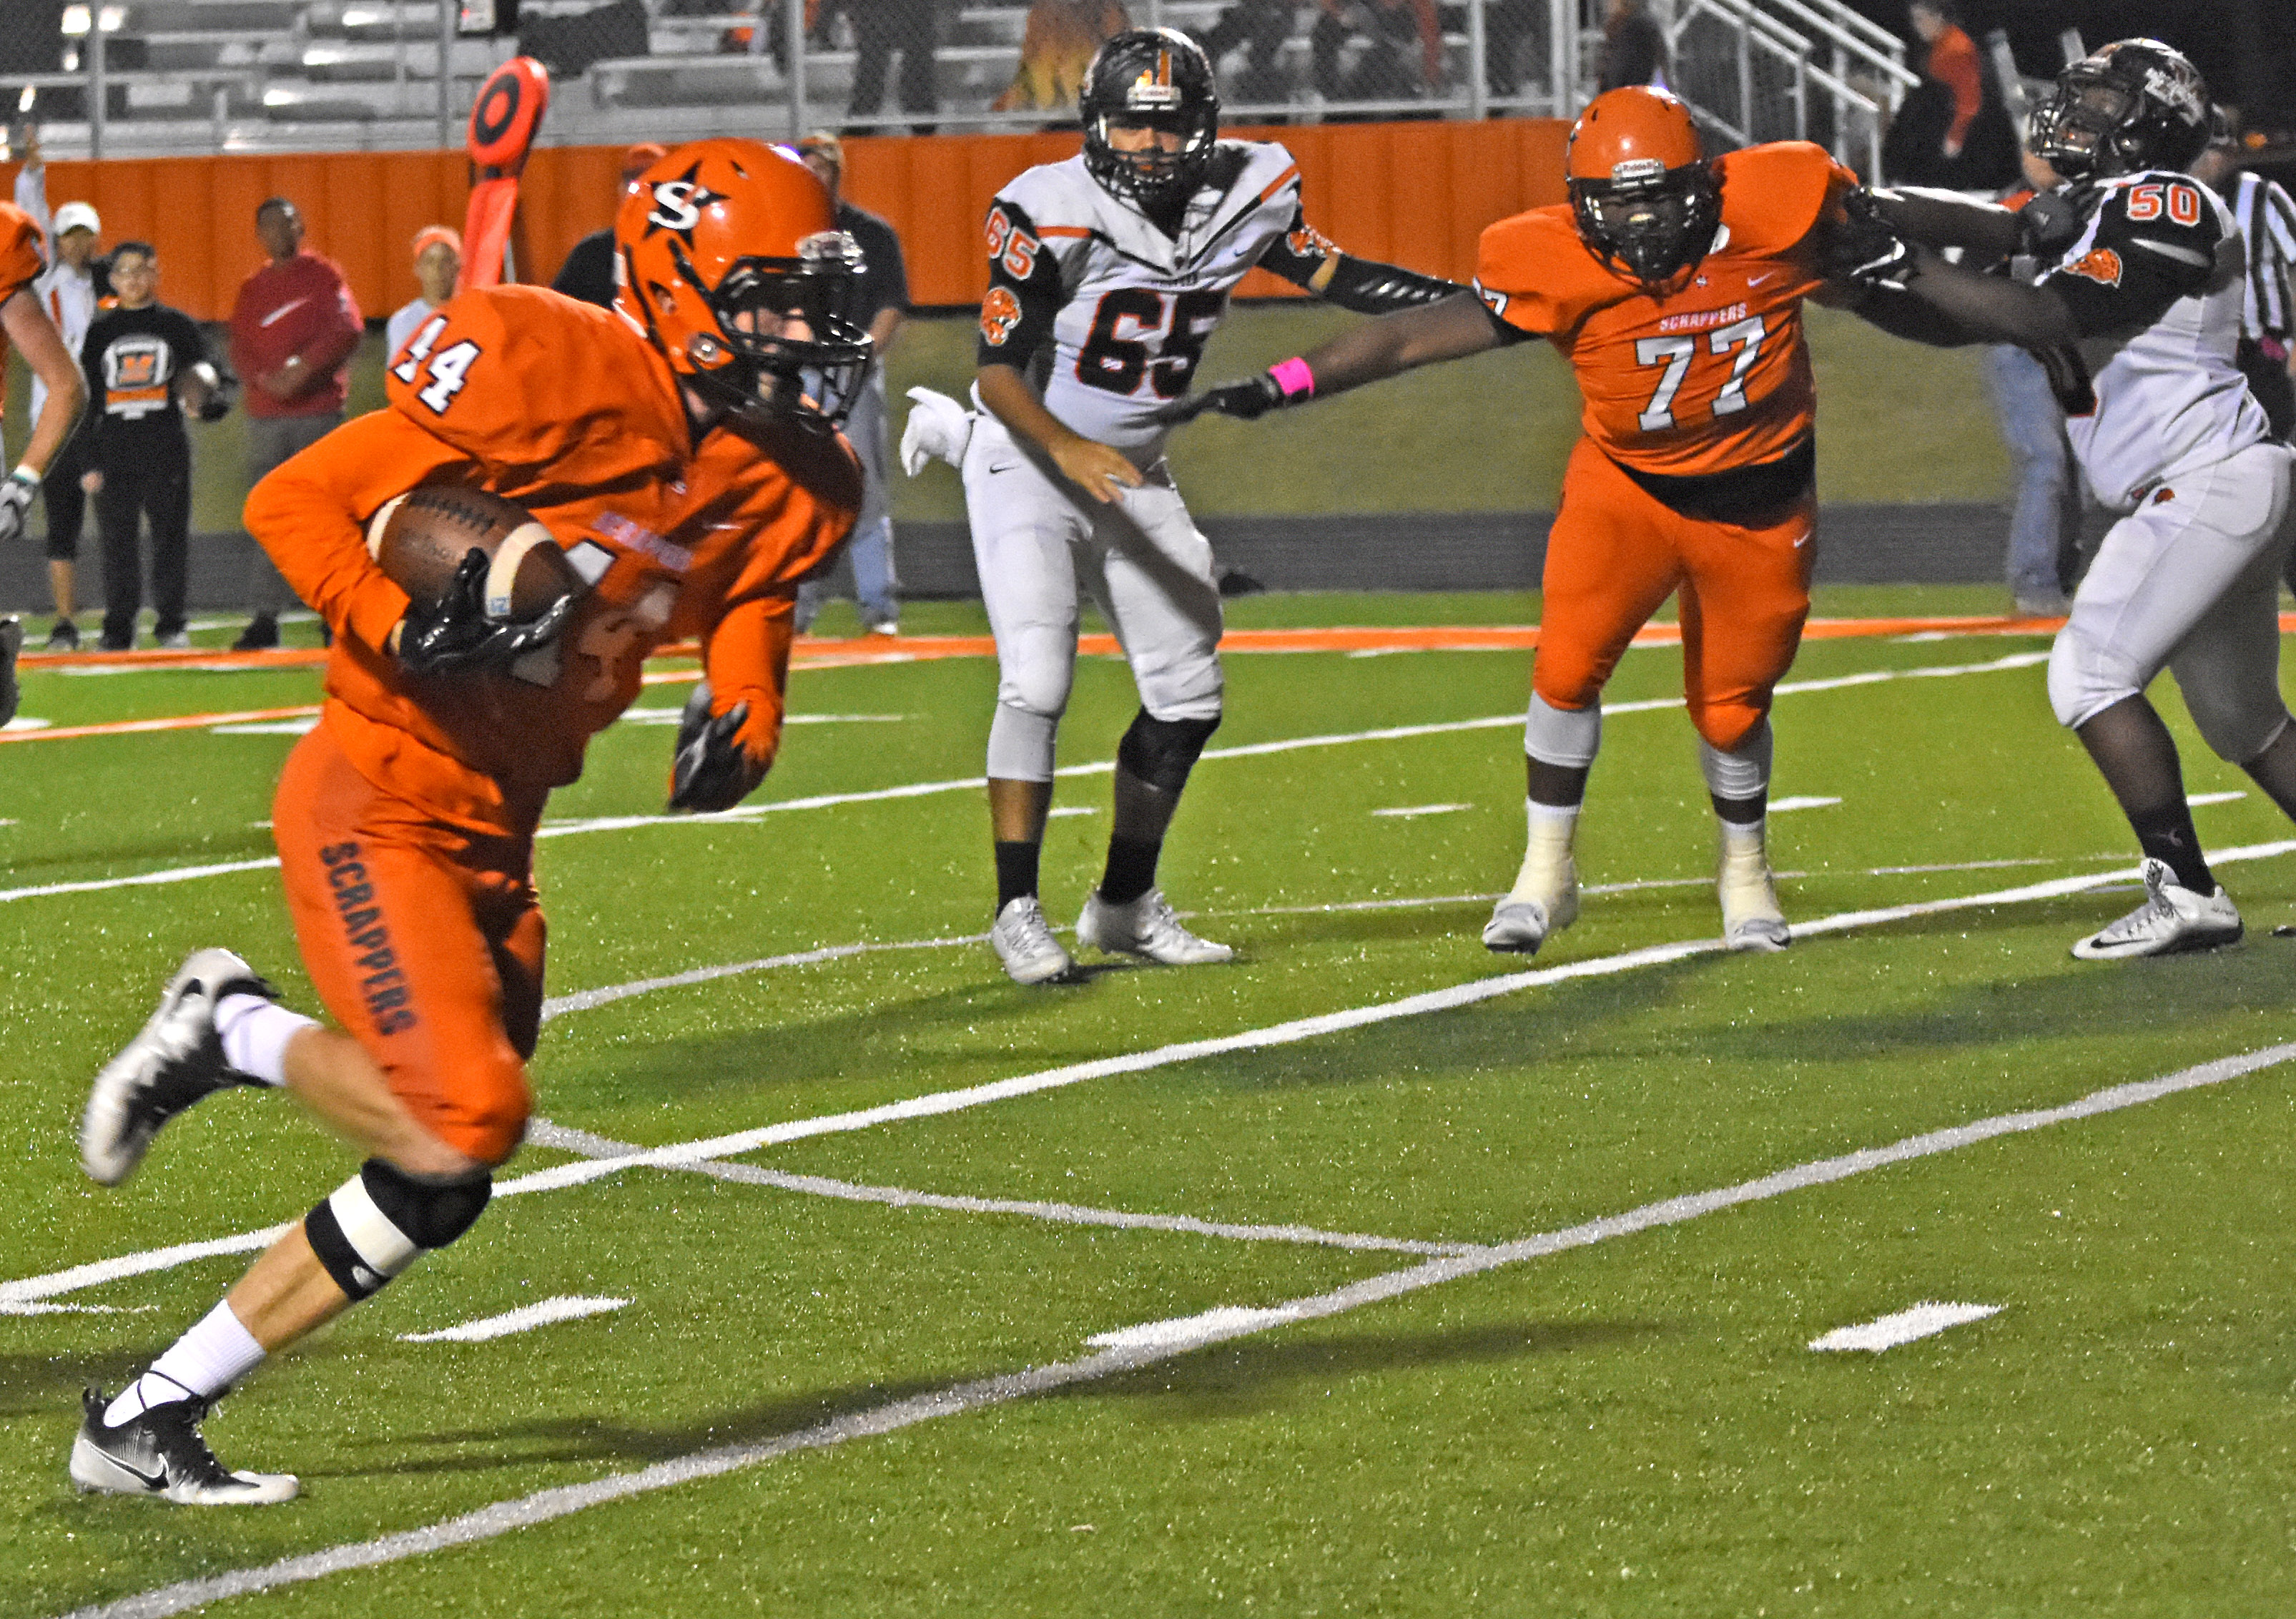 Austin Gibbs (44) picks off a Malvern pass and returns it 12 yards for SQUAD GHOUL. Scrapper cheerleaders strike an eerie theme for their blacklight a touchdown in Friday night’s victory over Malvern.